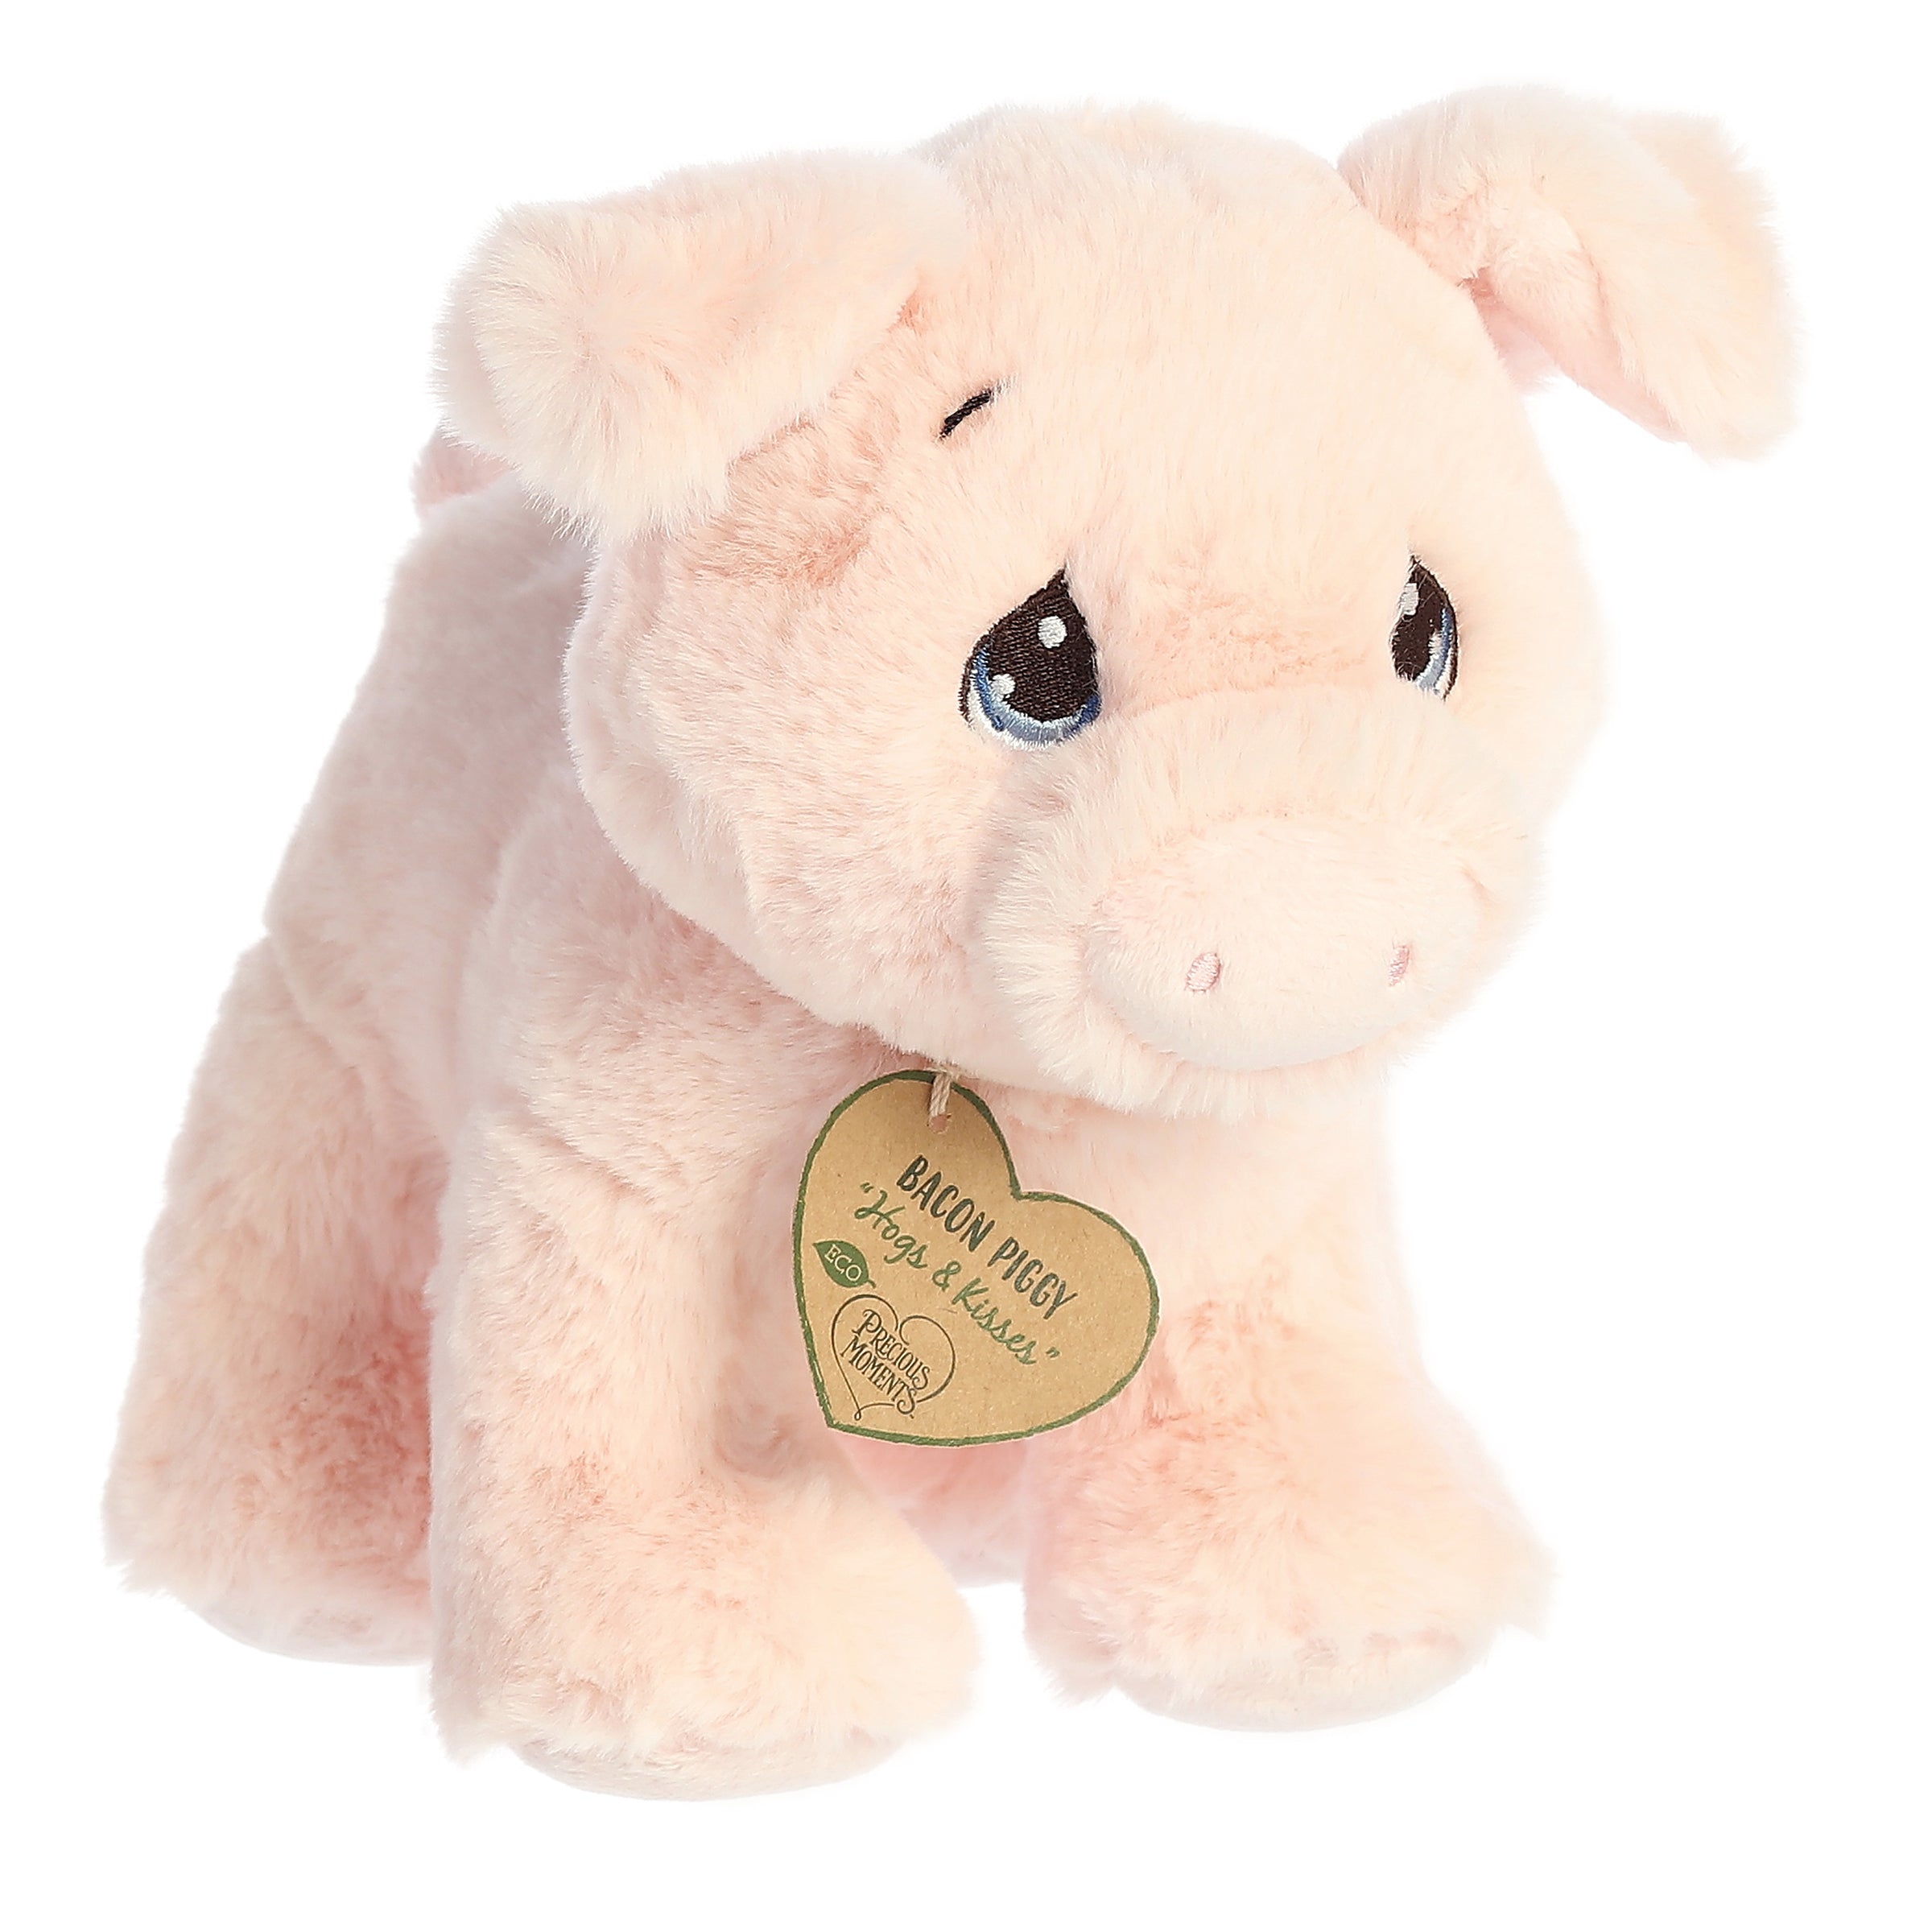 An eco-friendly piggy plush with tear-drop eyes, soft pink fur, and a precious moments inspirational tag on its neck.